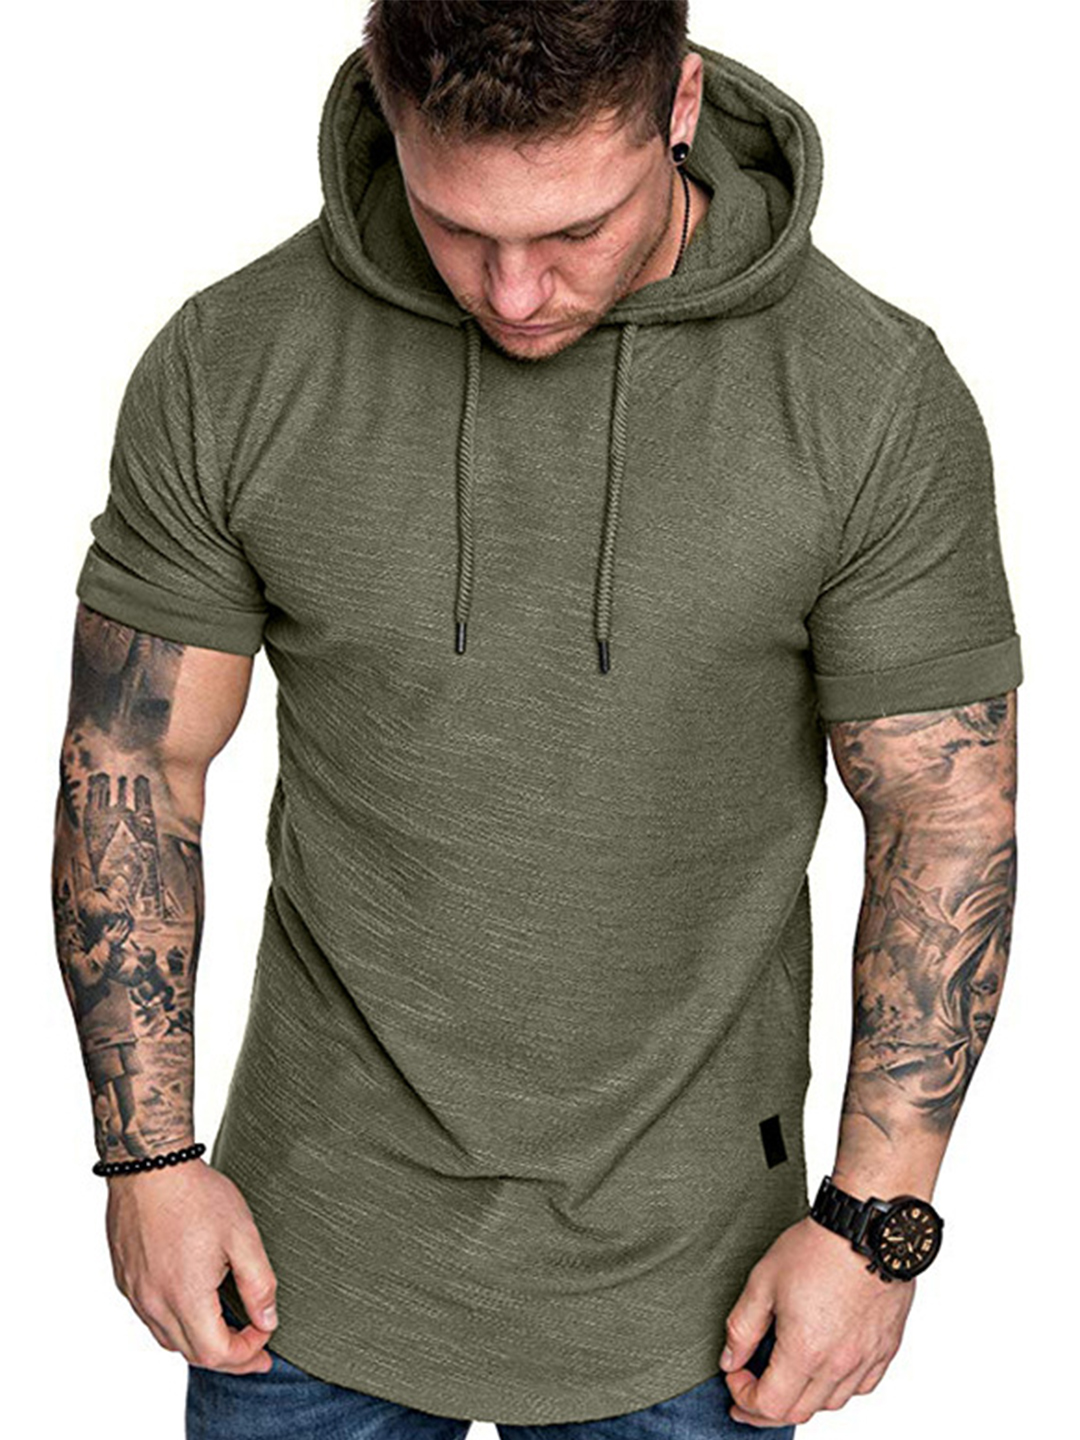 Men's Clash-Colored Knobby Cotton Hooded T-shirts